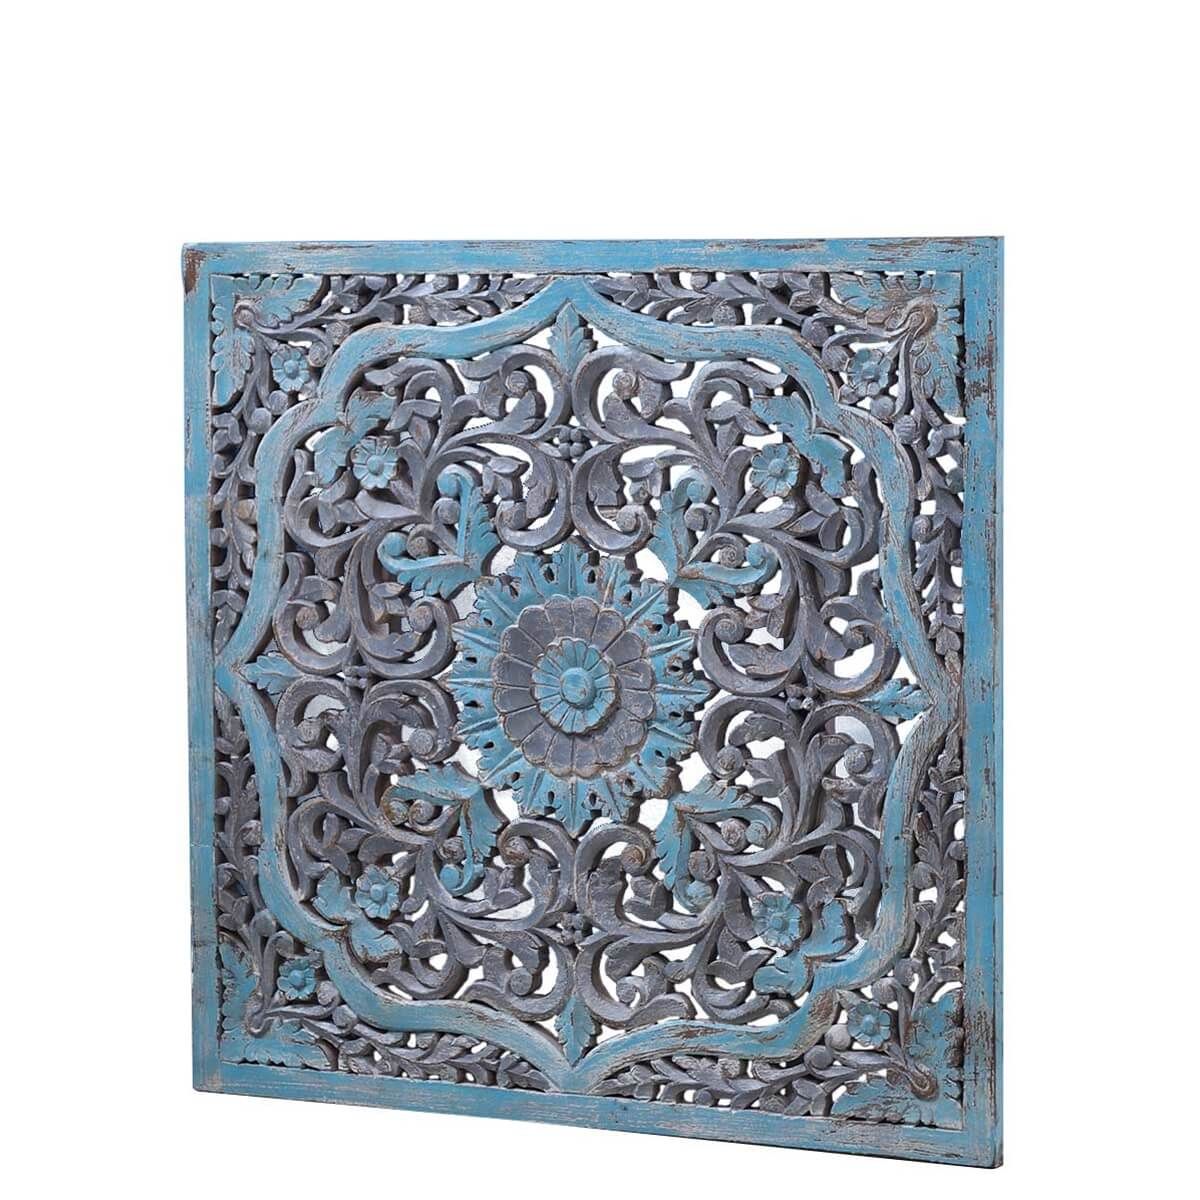 Blue Distress Solid Wood Carved Wall Decoration Panel Intended For Blue Wood Wall Art (View 9 of 15)